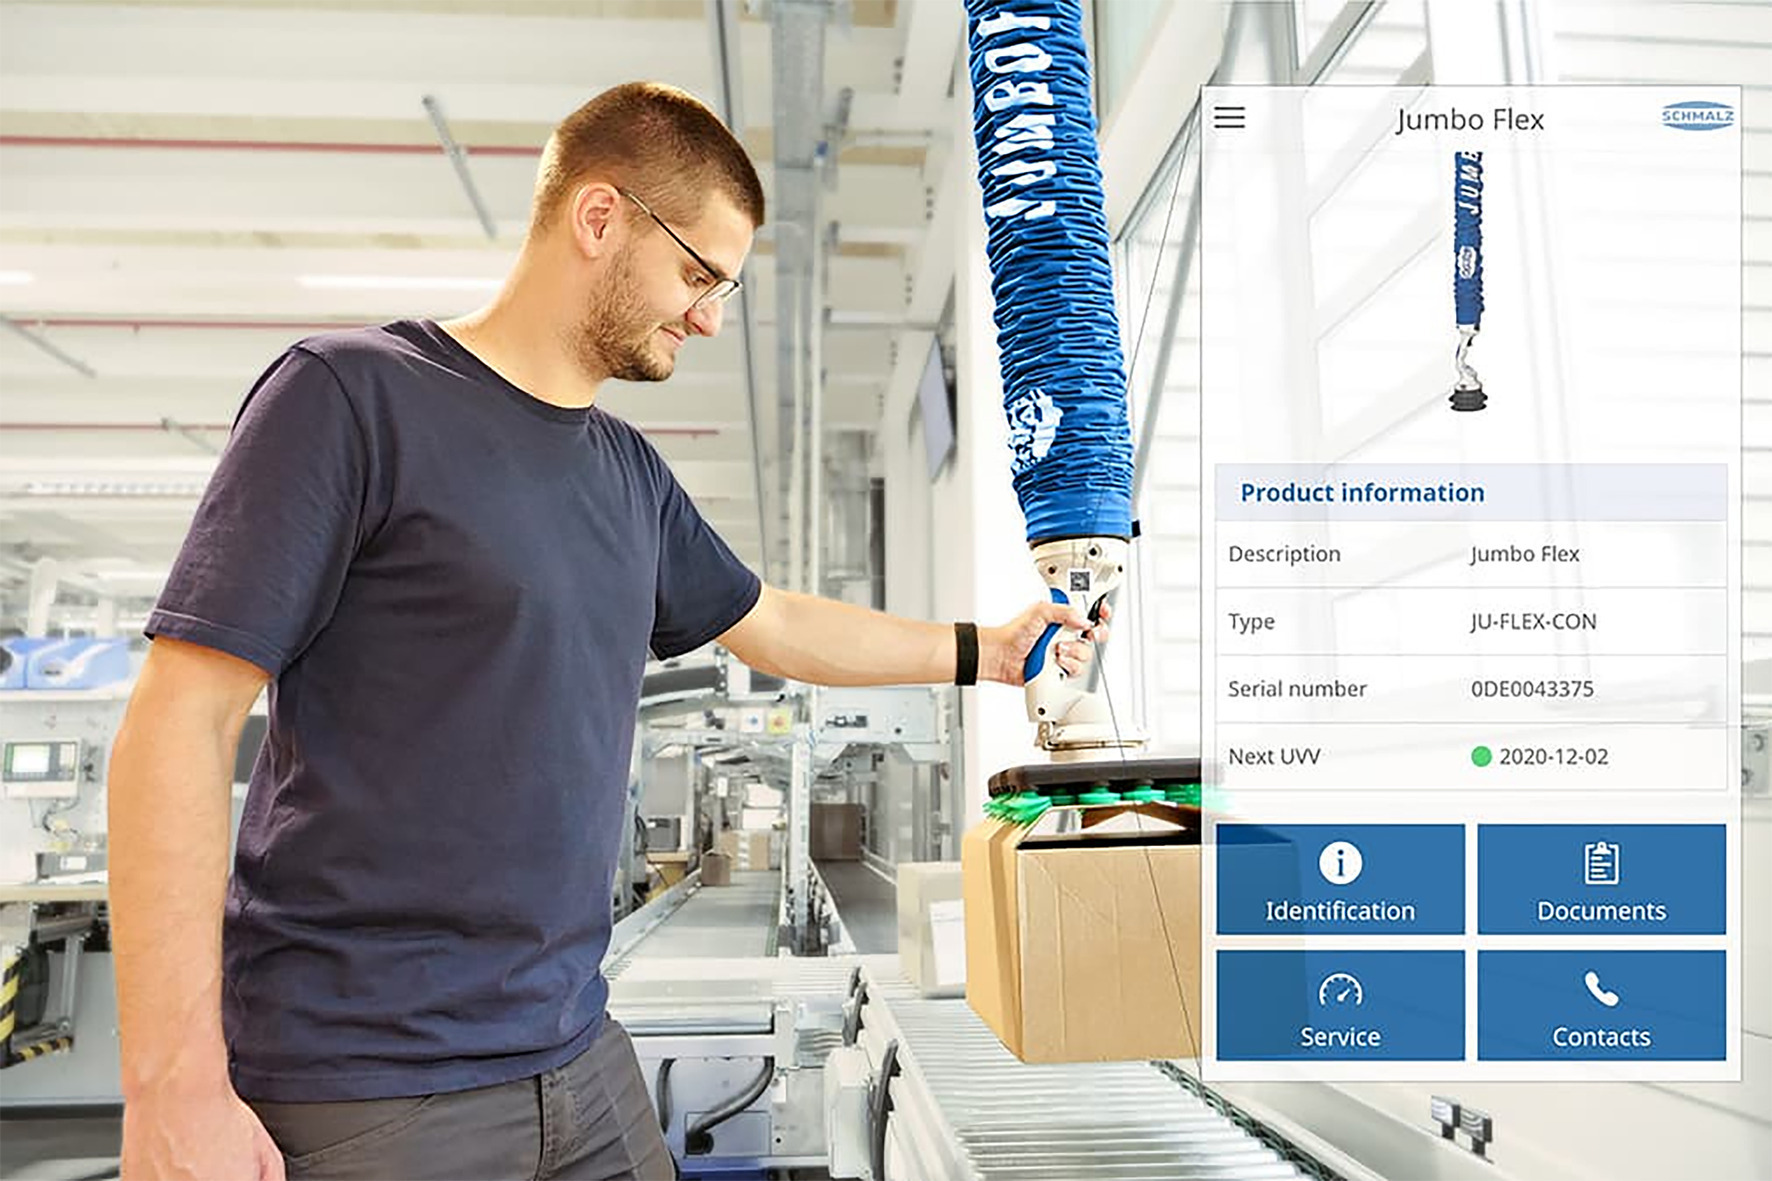 The QR code tells the Schmalz ControlRoom app all the important data about the vacuum tube lifter JumboFlex in use. © Schmalz